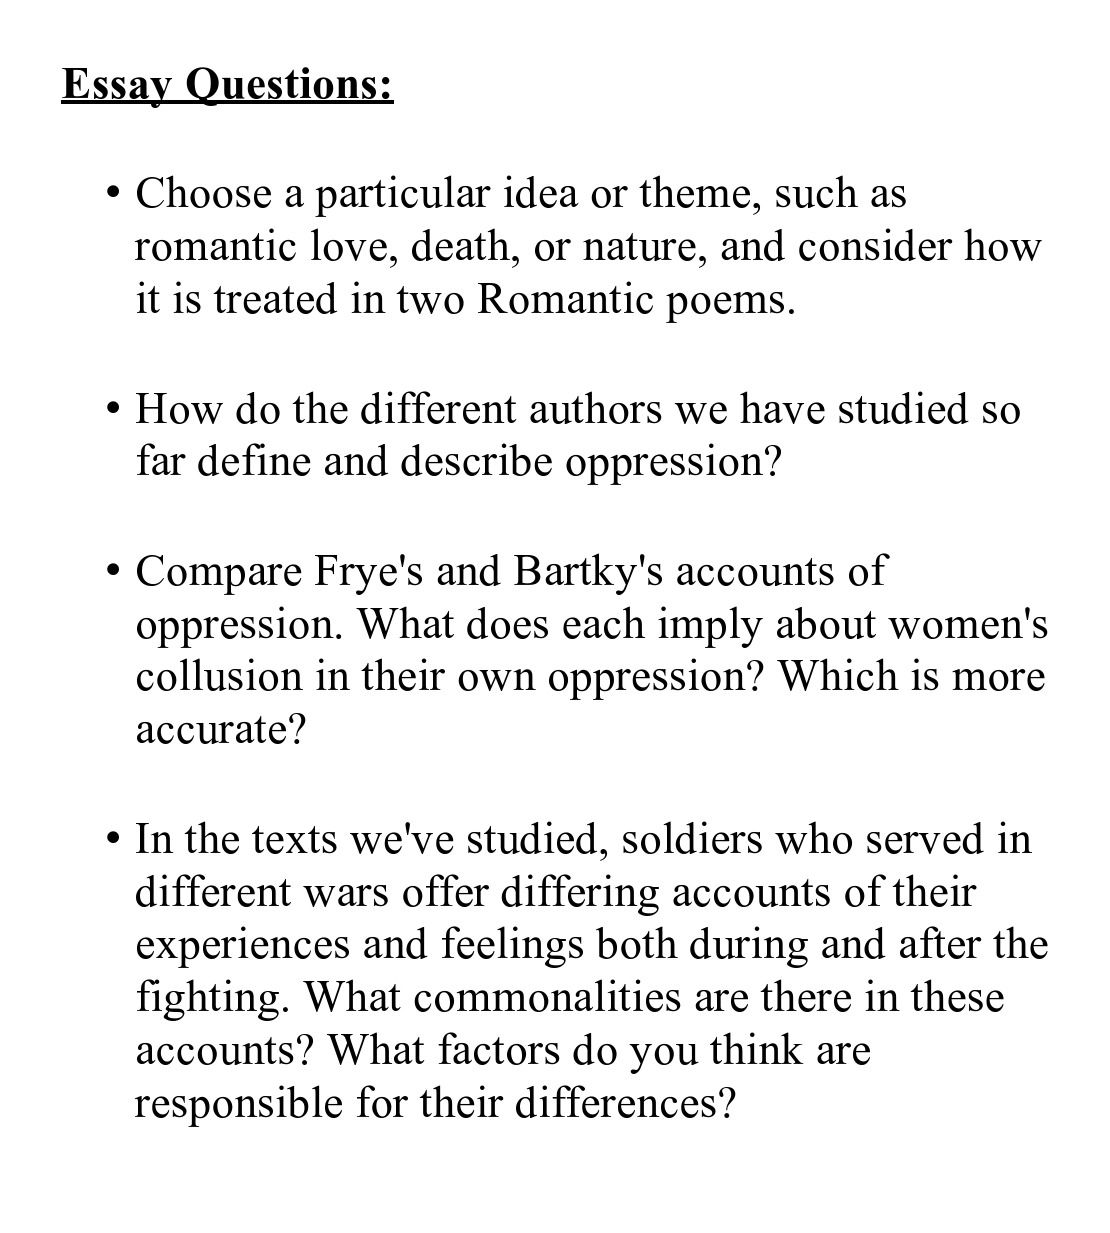 Help on essay questions